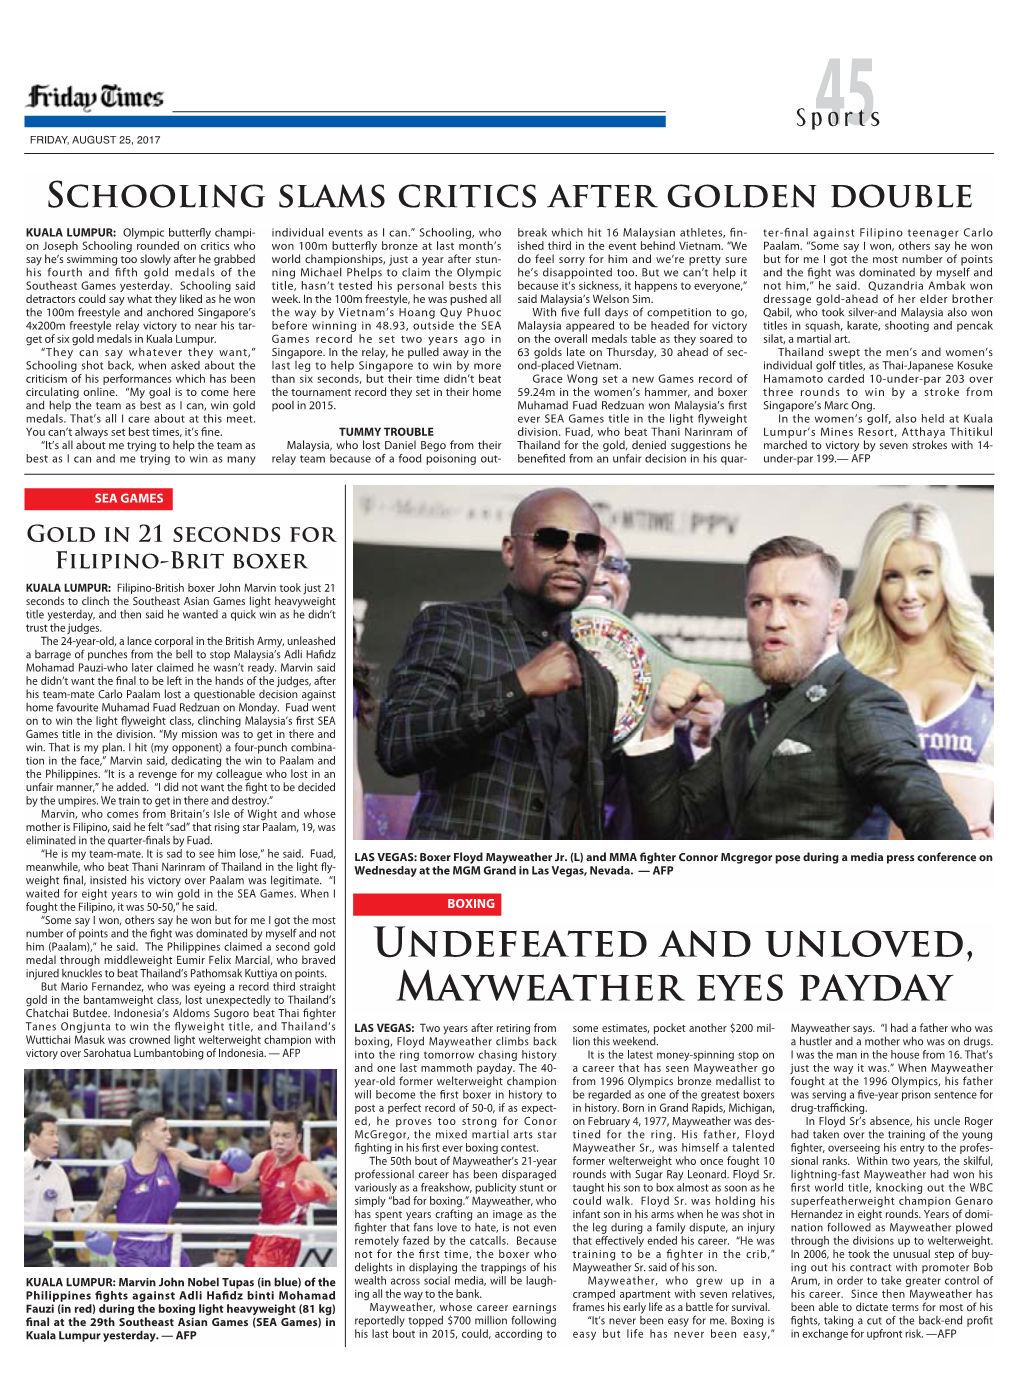 Undefeated and Unloved, Mayweather Eyes Payday